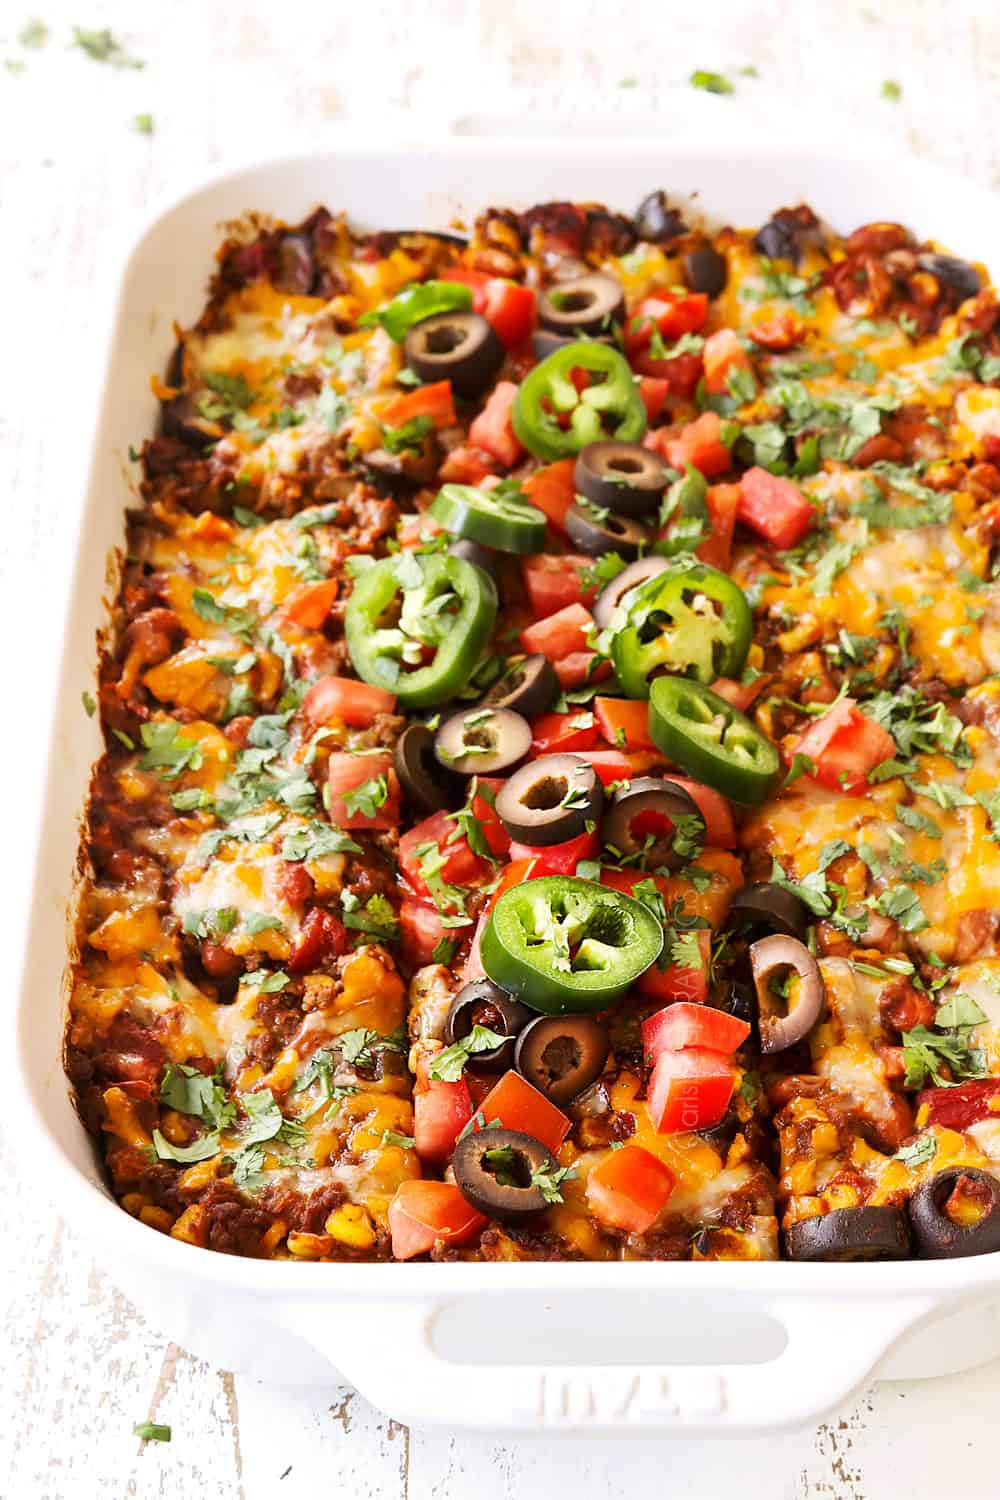 up close of enchilada casserole recipe sliced into slices garnished with tomatoes, olives and jalapenos